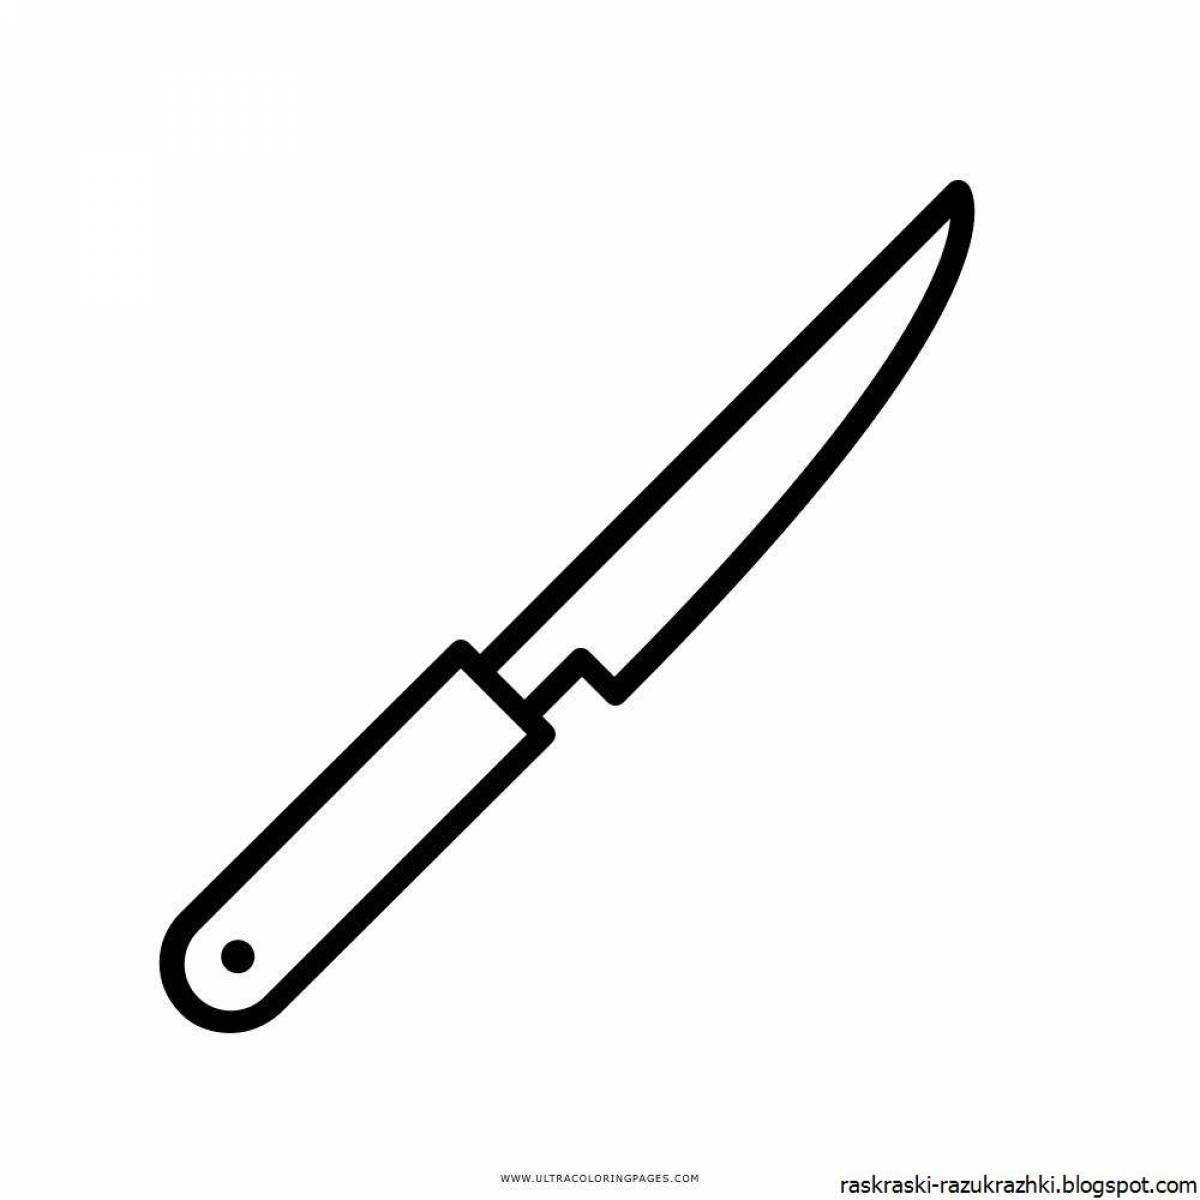 Coloring book brave knife